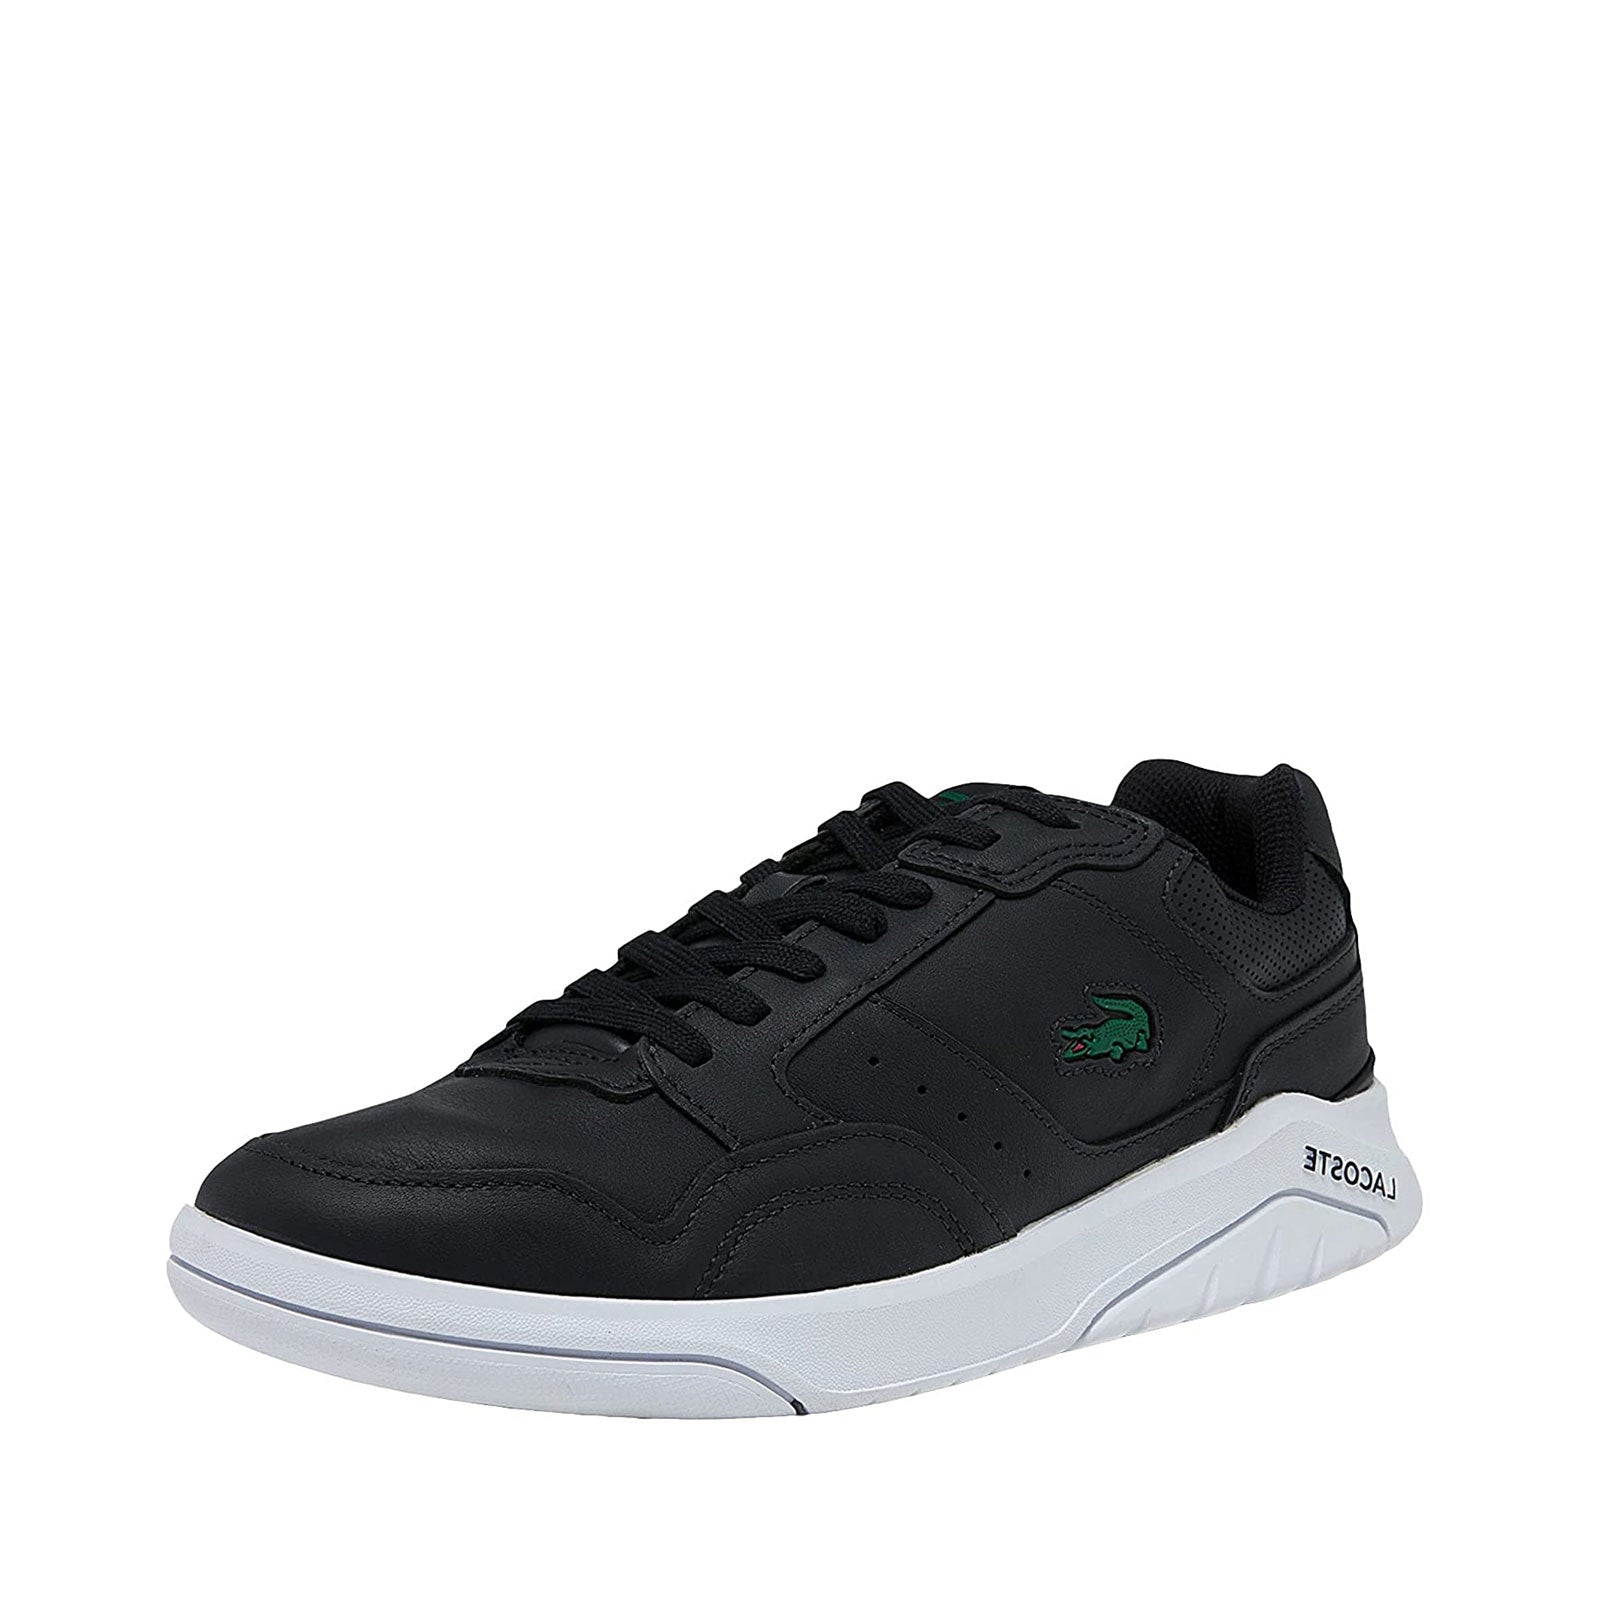 Lacoste Women's Game Advance Luxe Leather and Suede Casual